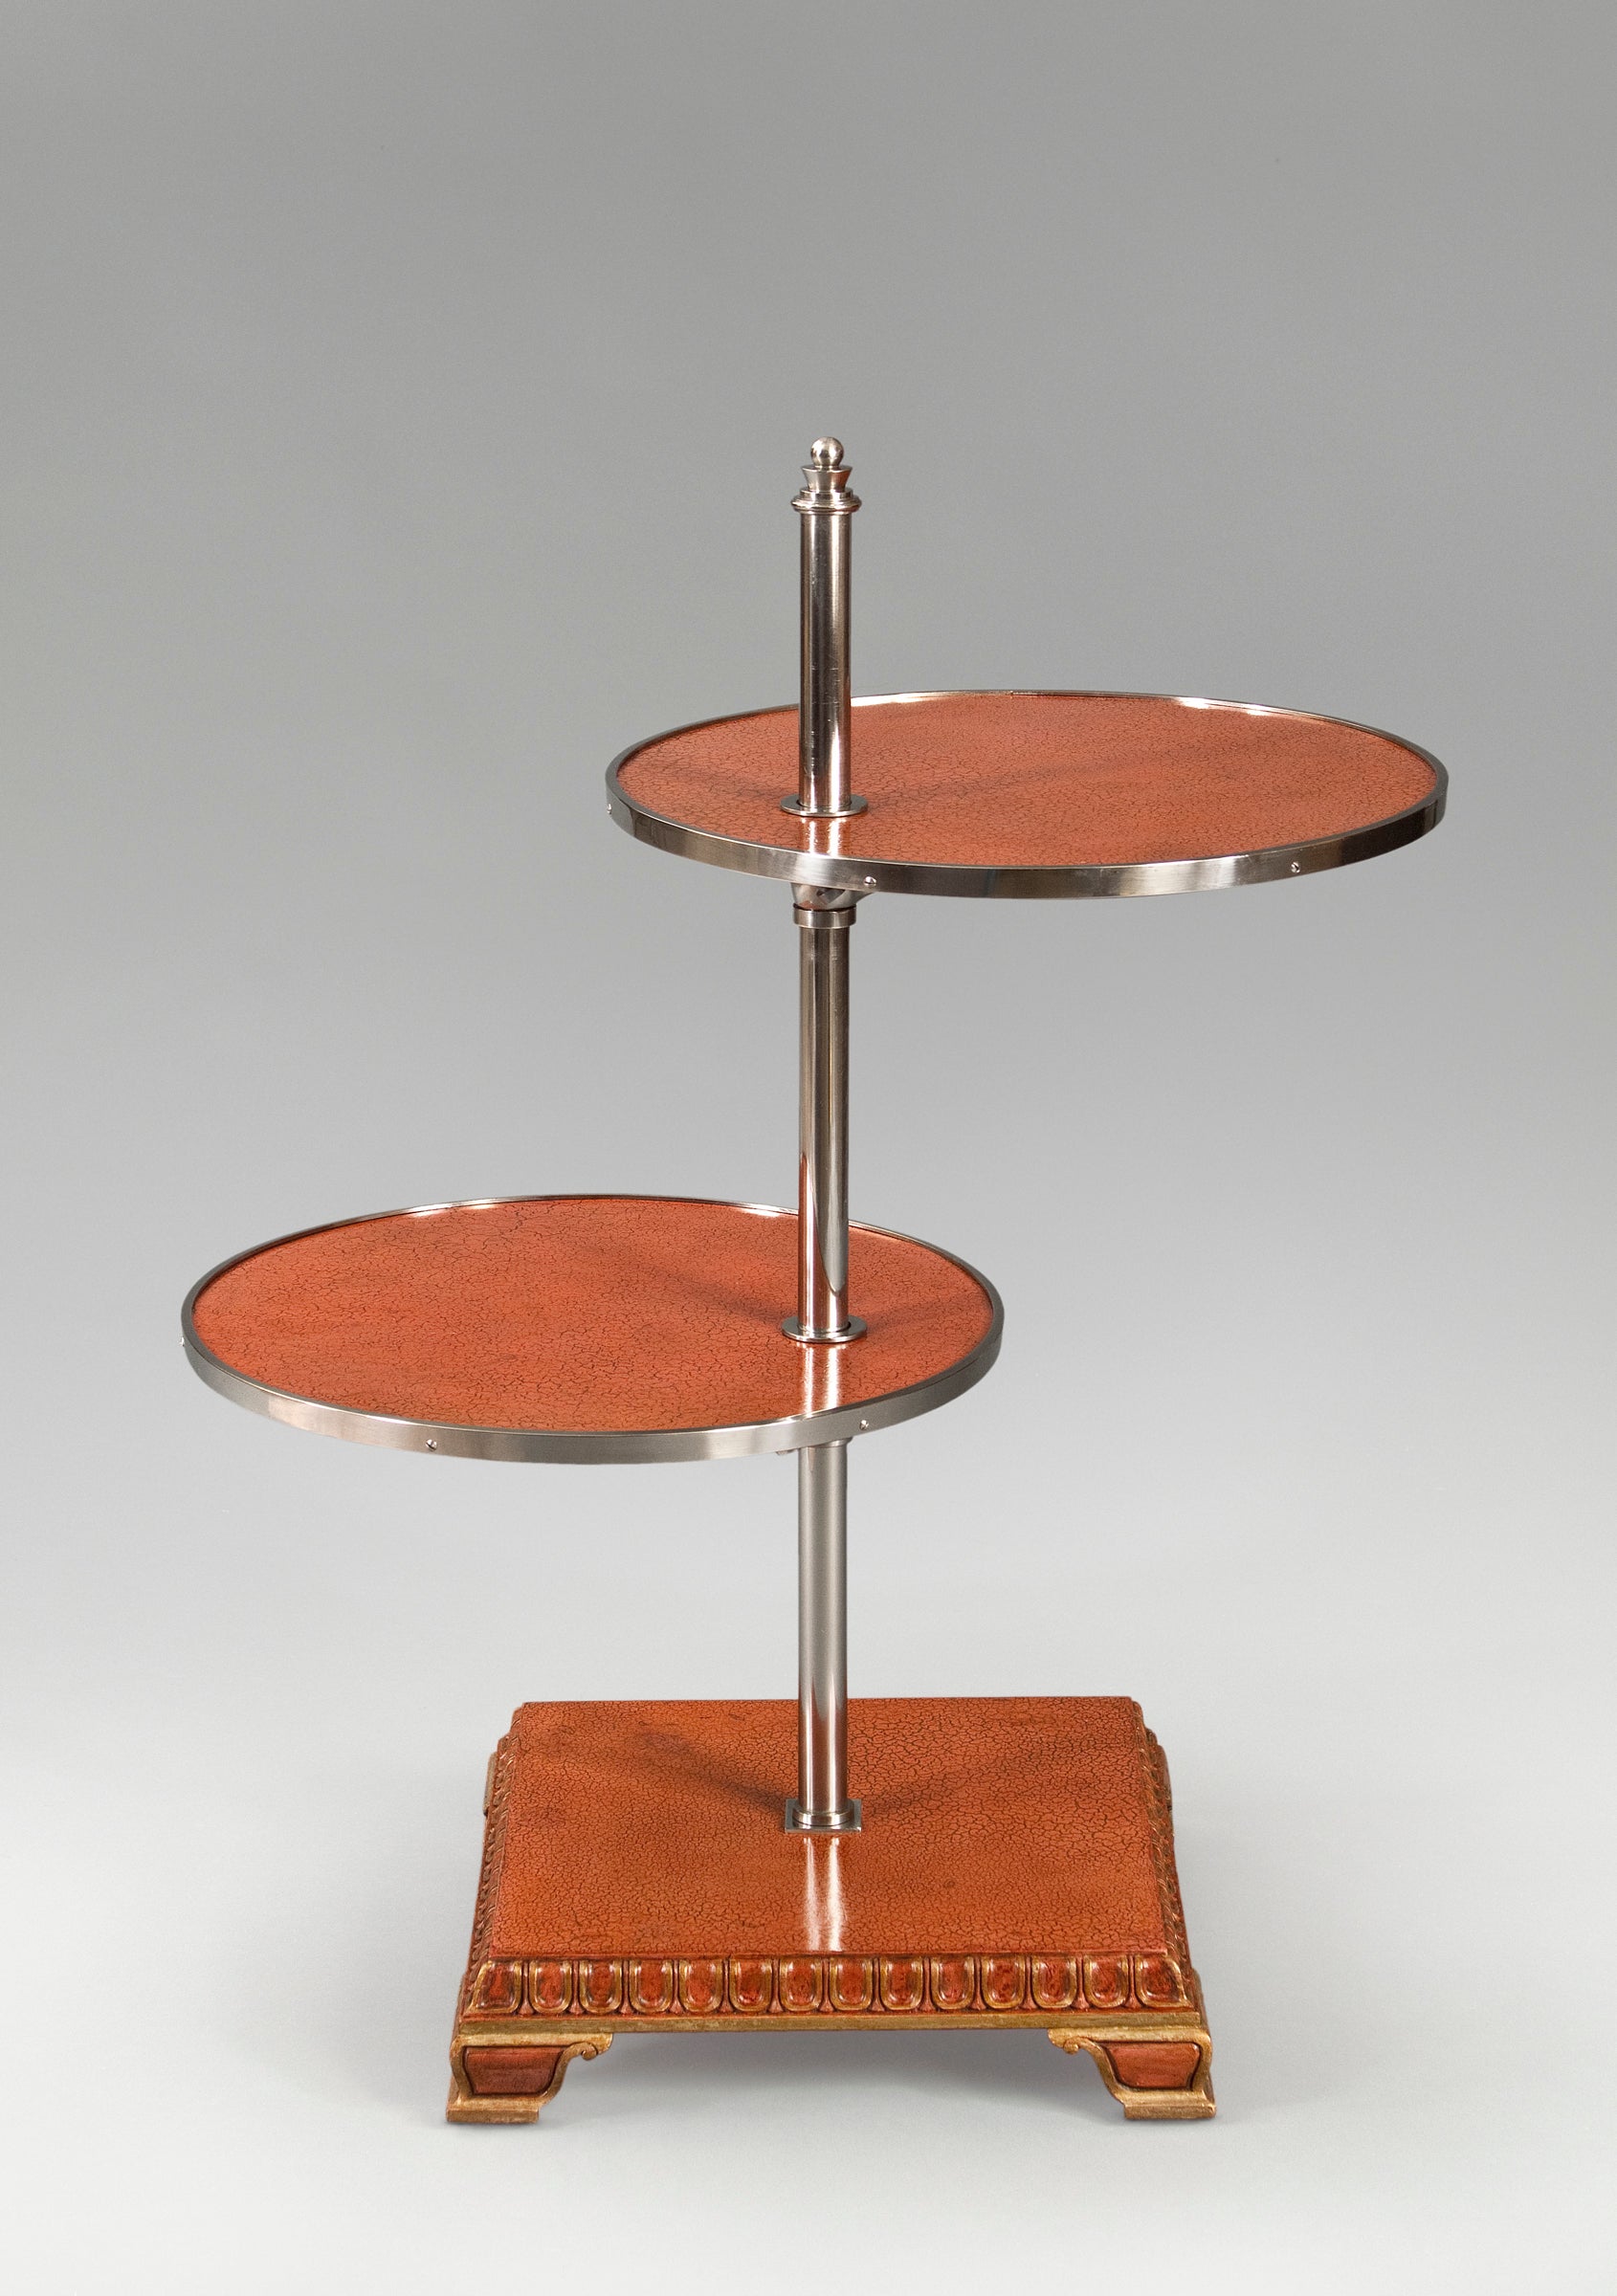 A Nickel, Parcel-Gilt and Crackled Lacquer Adjustable Table by Axel Einar Hjorth